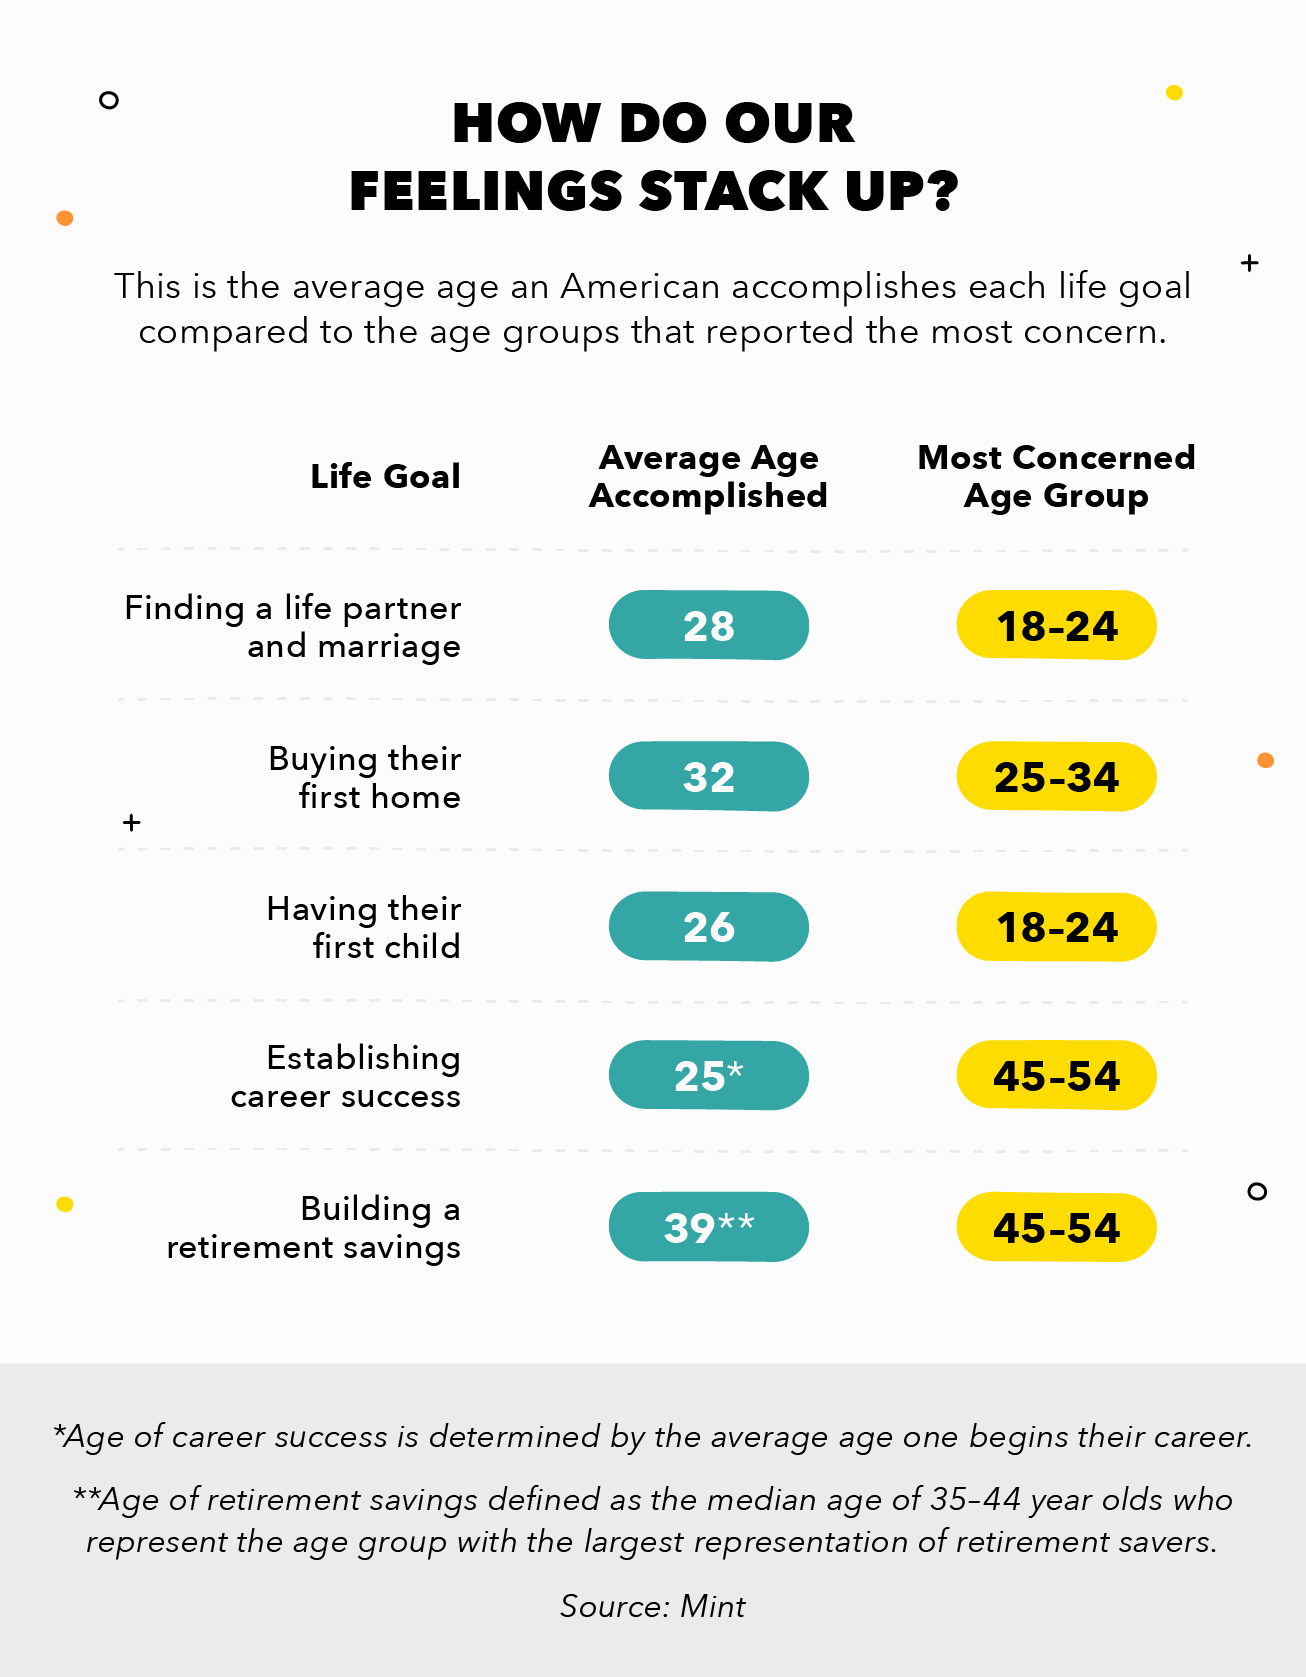 Comparison of when American achieve these life milestones vs. the most concerned ages